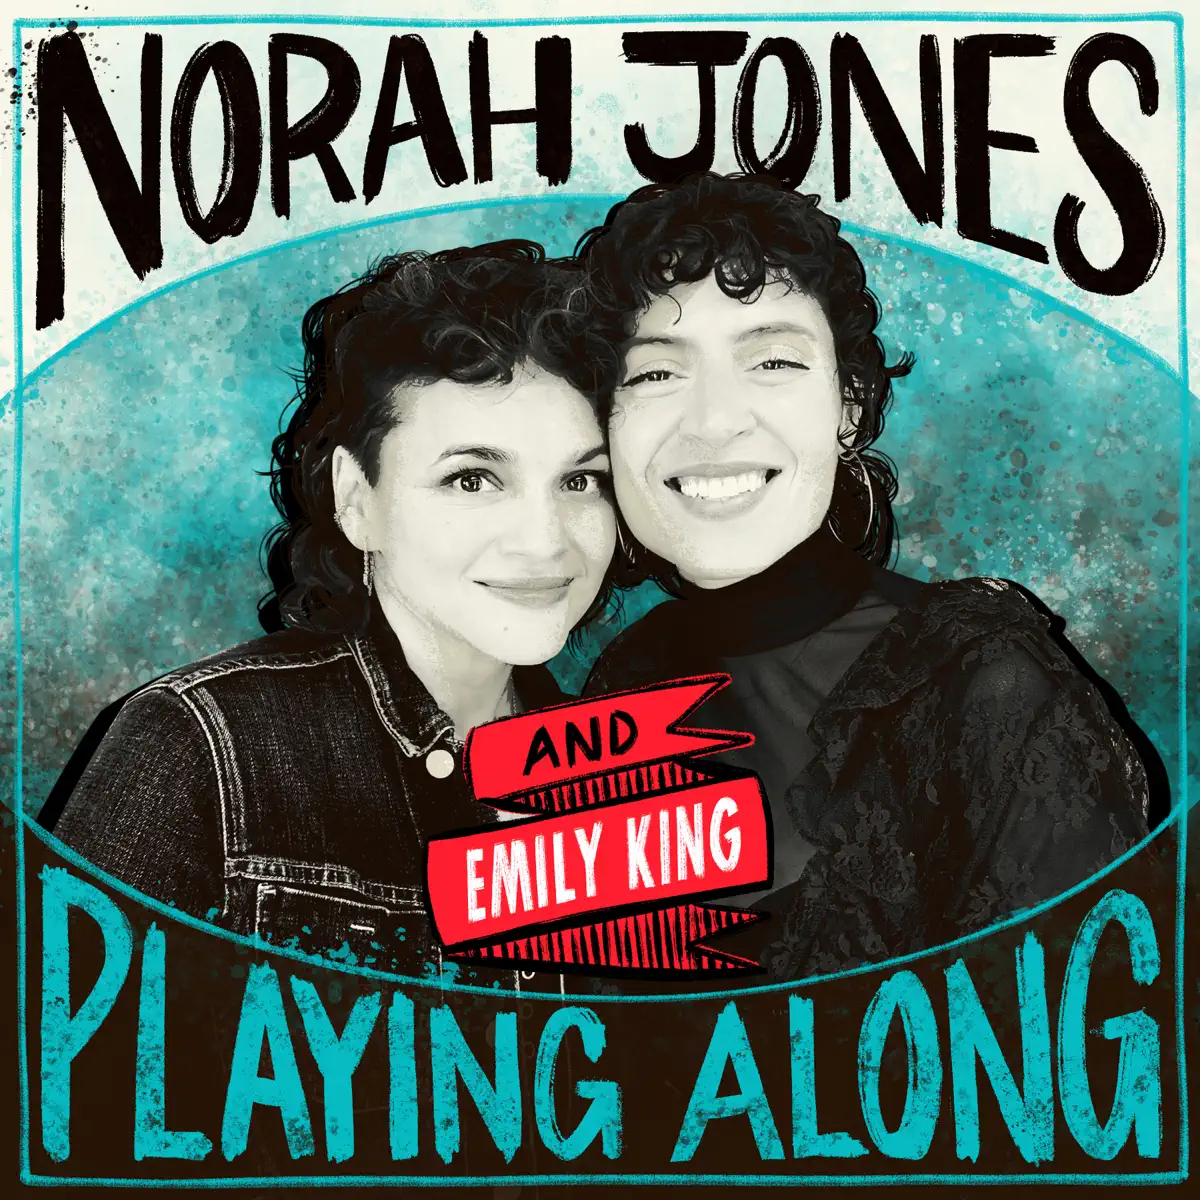 Norah Jones & Emily King - Bad Memory (From Norah Jones is Playing Along Podcast) - Single (2023) [iTunes Plus AAC M4A]-新房子